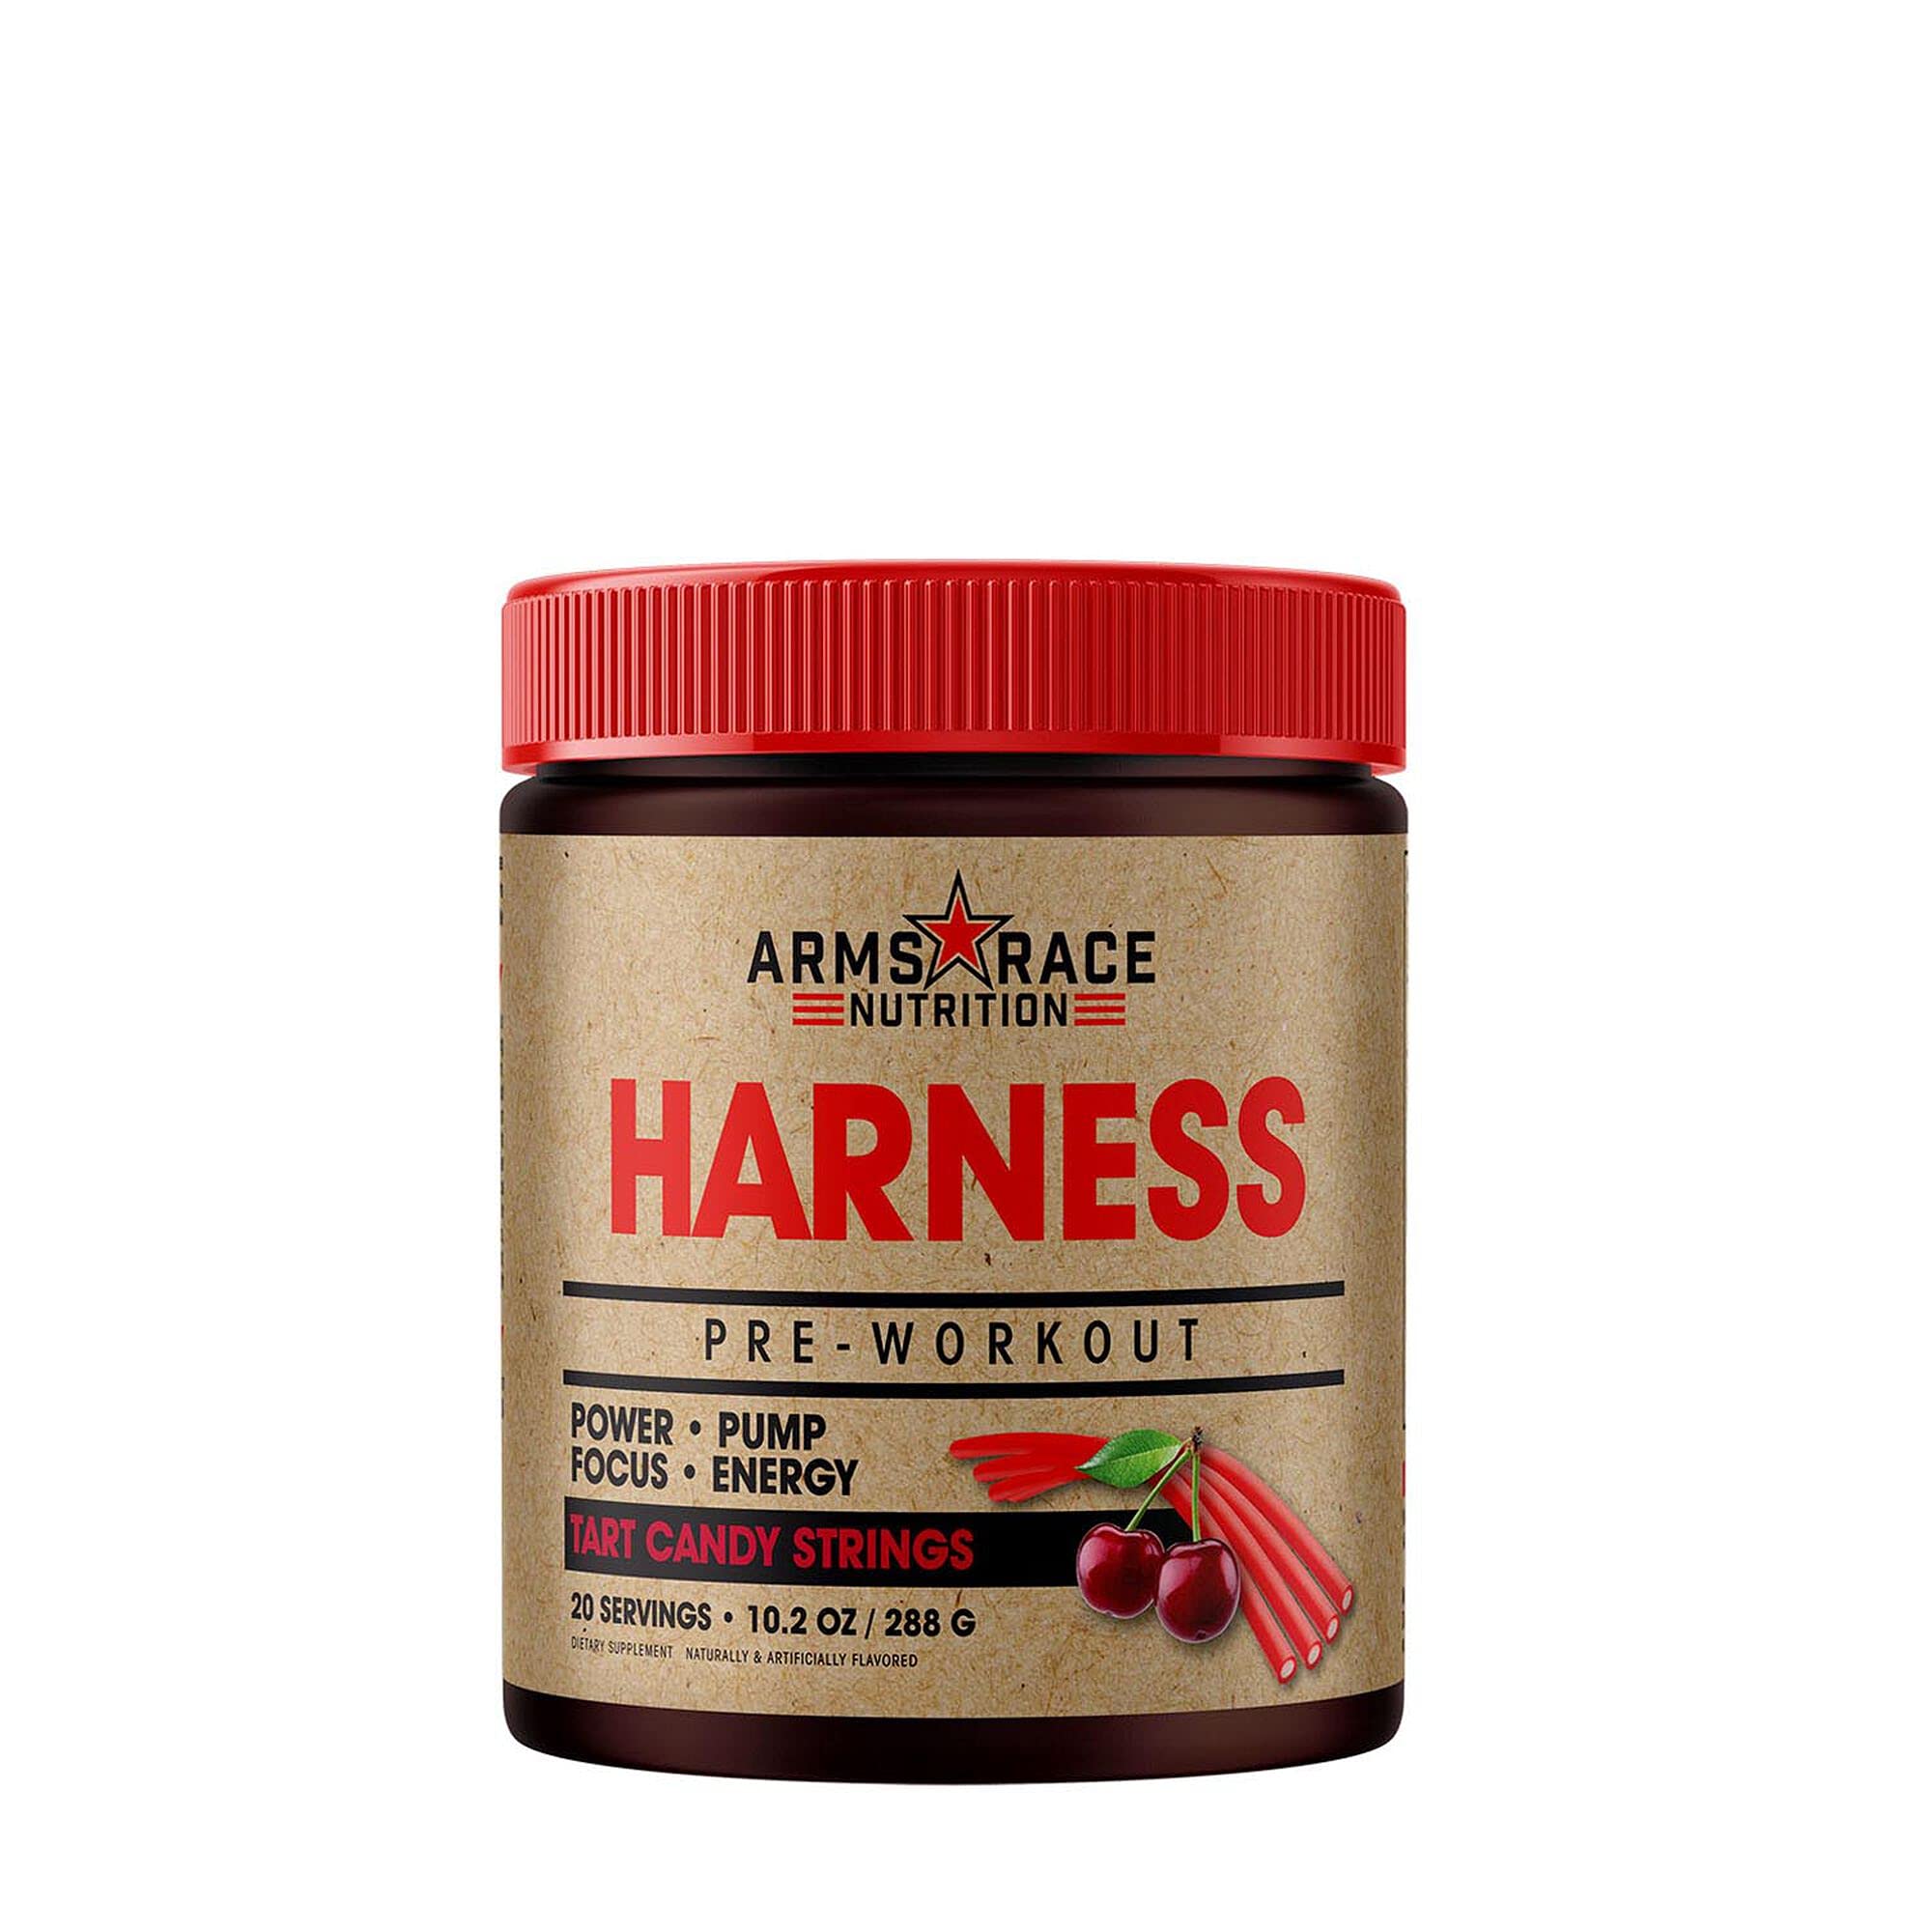 Arms Race Nutrition Harness Pre-Workout - Tart Candy Strings